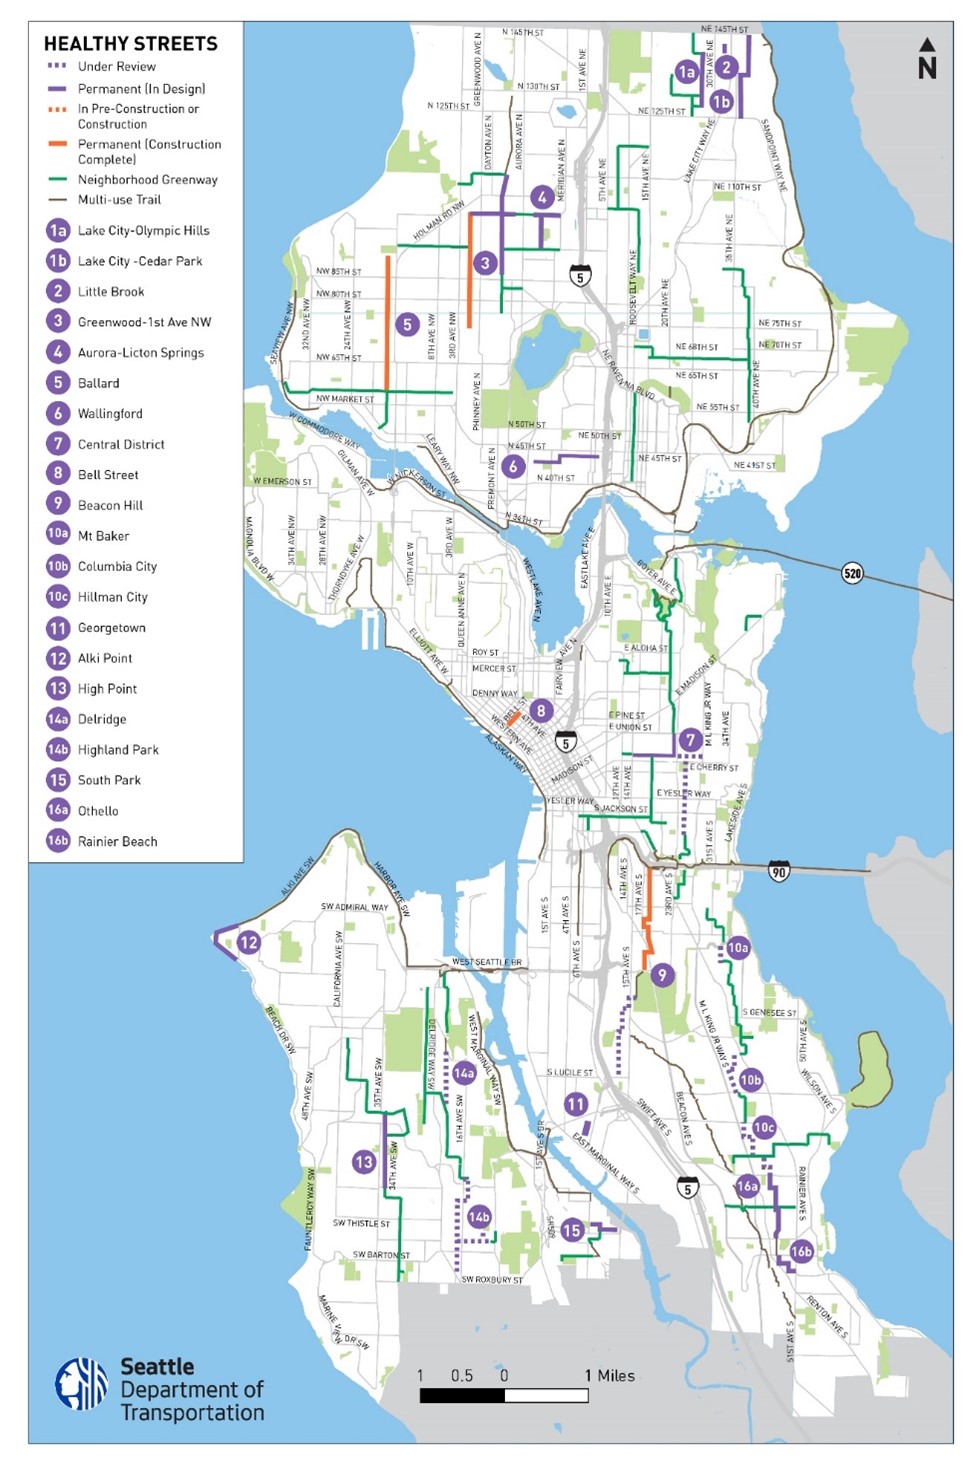 A map of Seattle showing the status of different Healthy Street locations. 14 locations have already received permanent upgrades or are in the process of receiving permanent upgrades. Six locations are still being evaluated. 